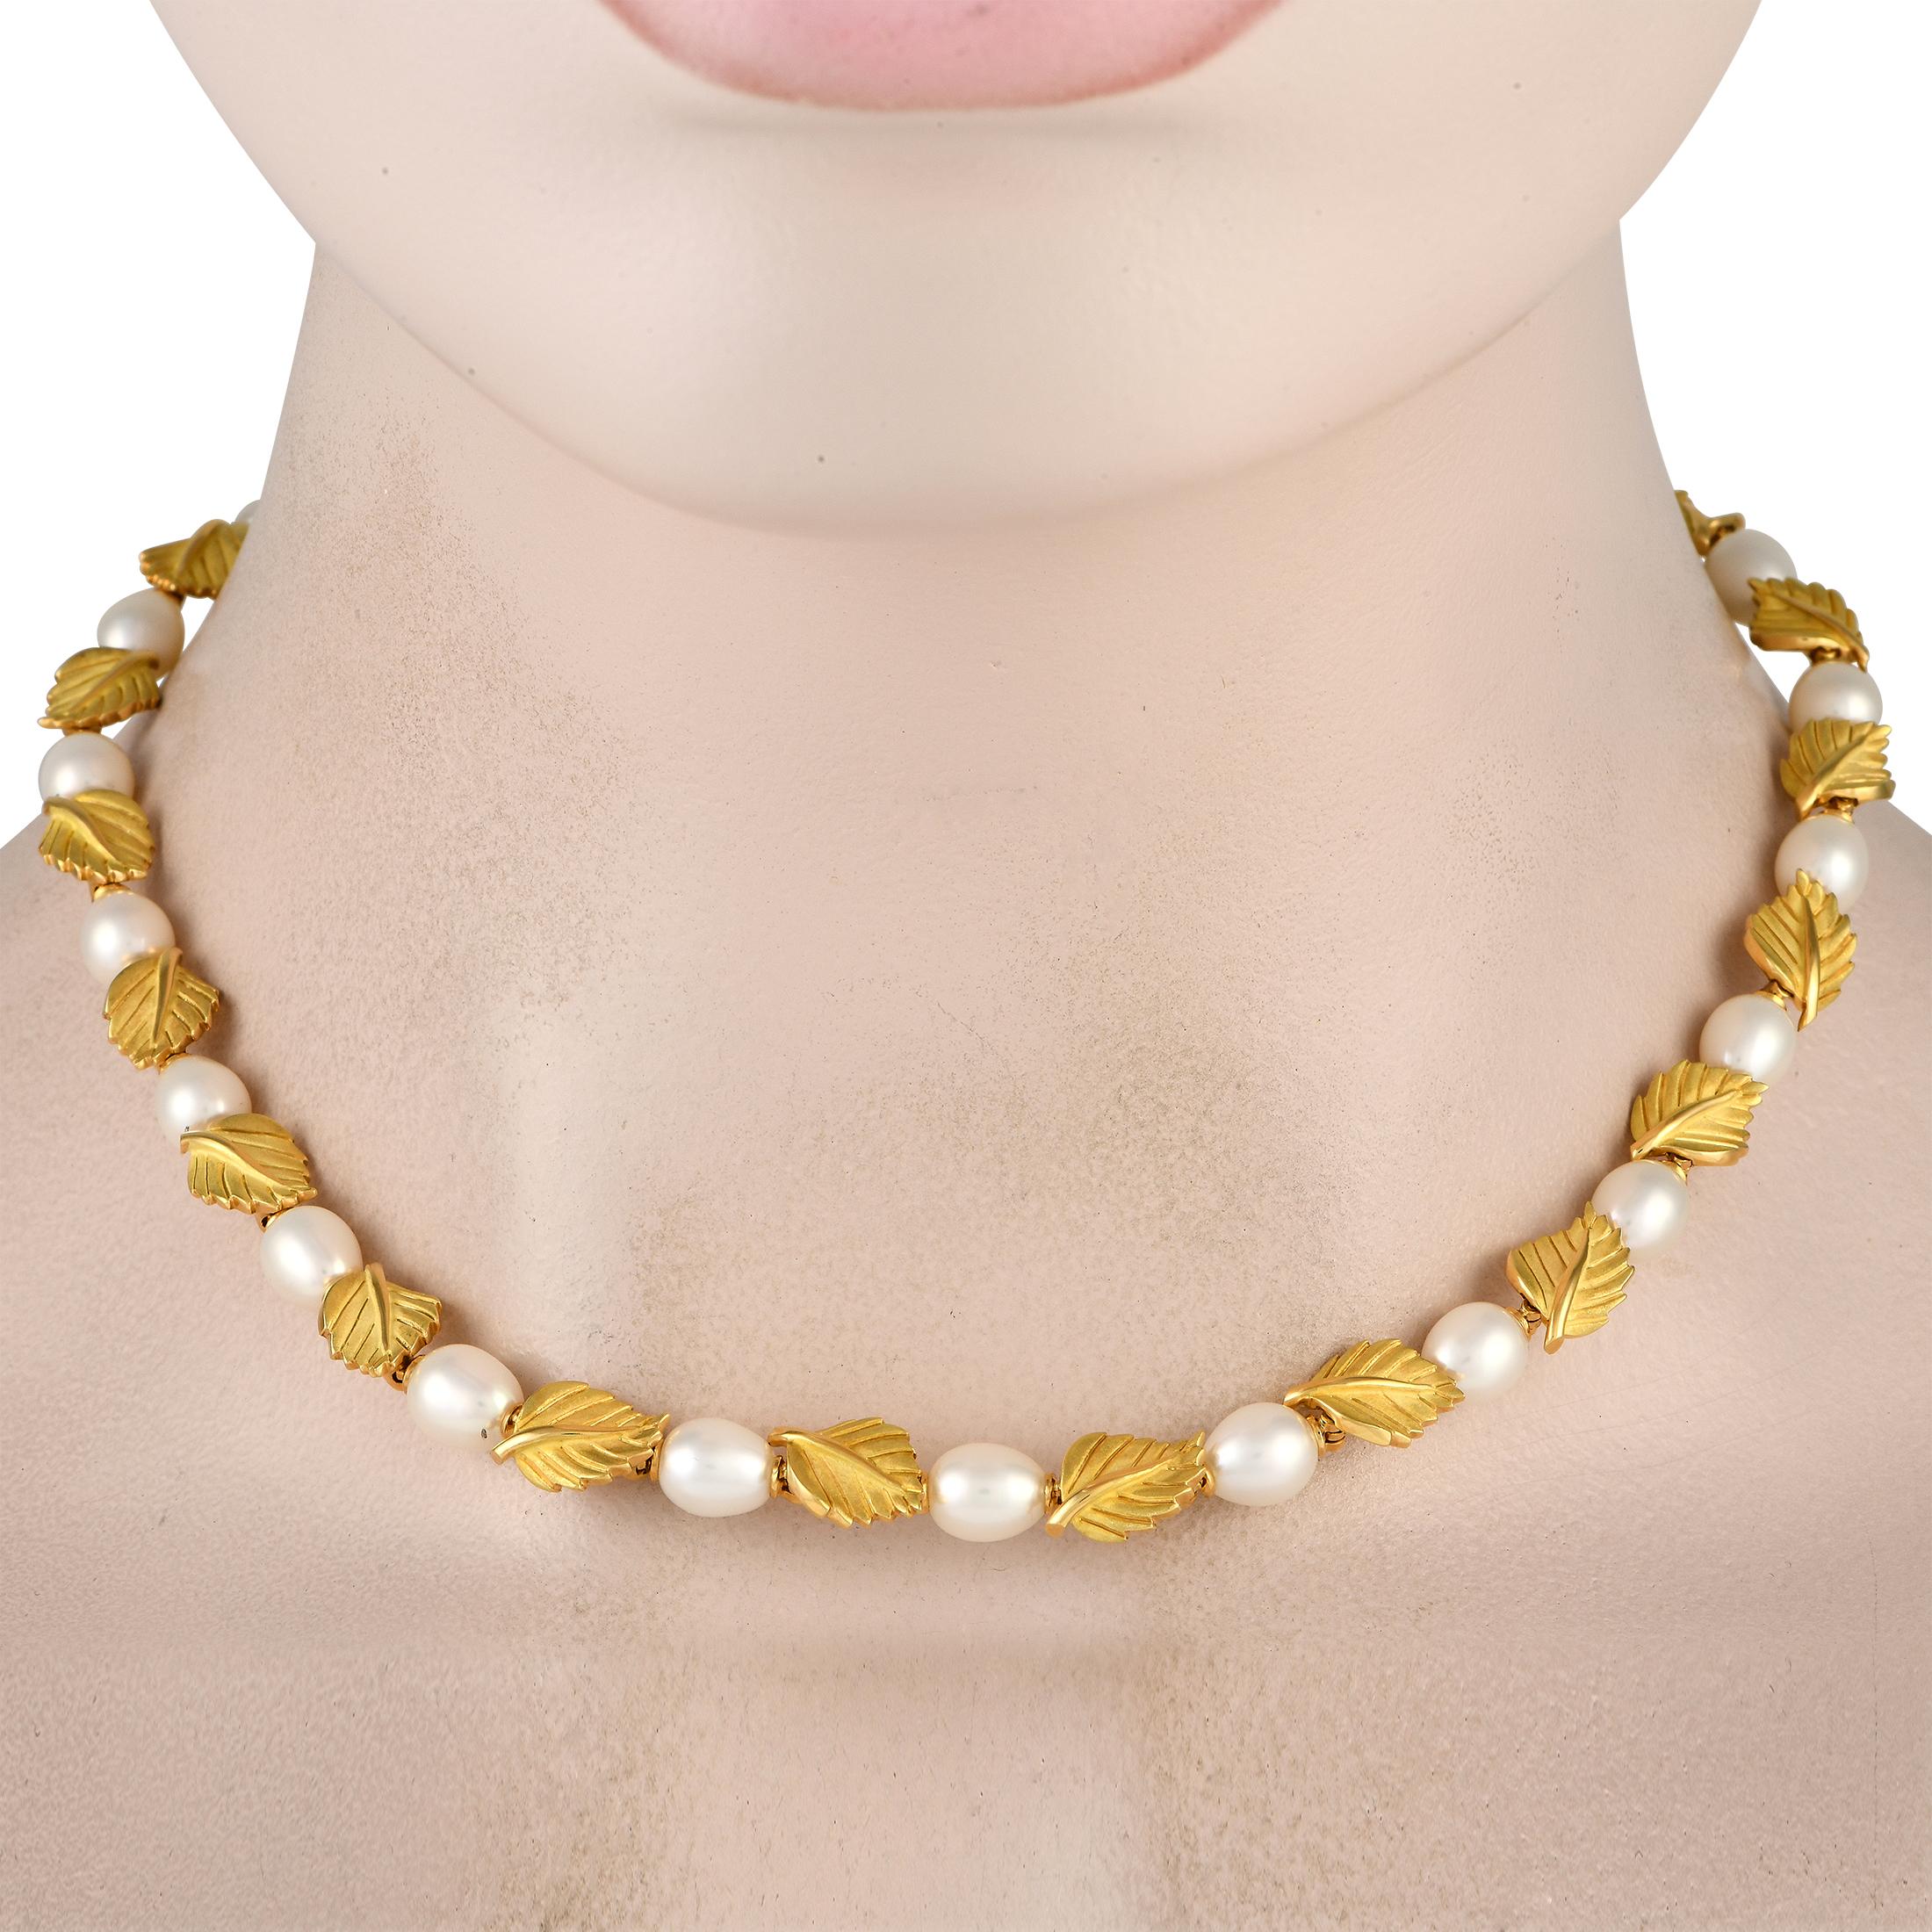 This pearl and leaf choker necklace from Tiffany & Co. will surely add a lot of charm to any outfit. It features a continuous row of alternating white pearl and sculpted leaf-shaped links in yellow gold. The necklace measures 17 inches long and has